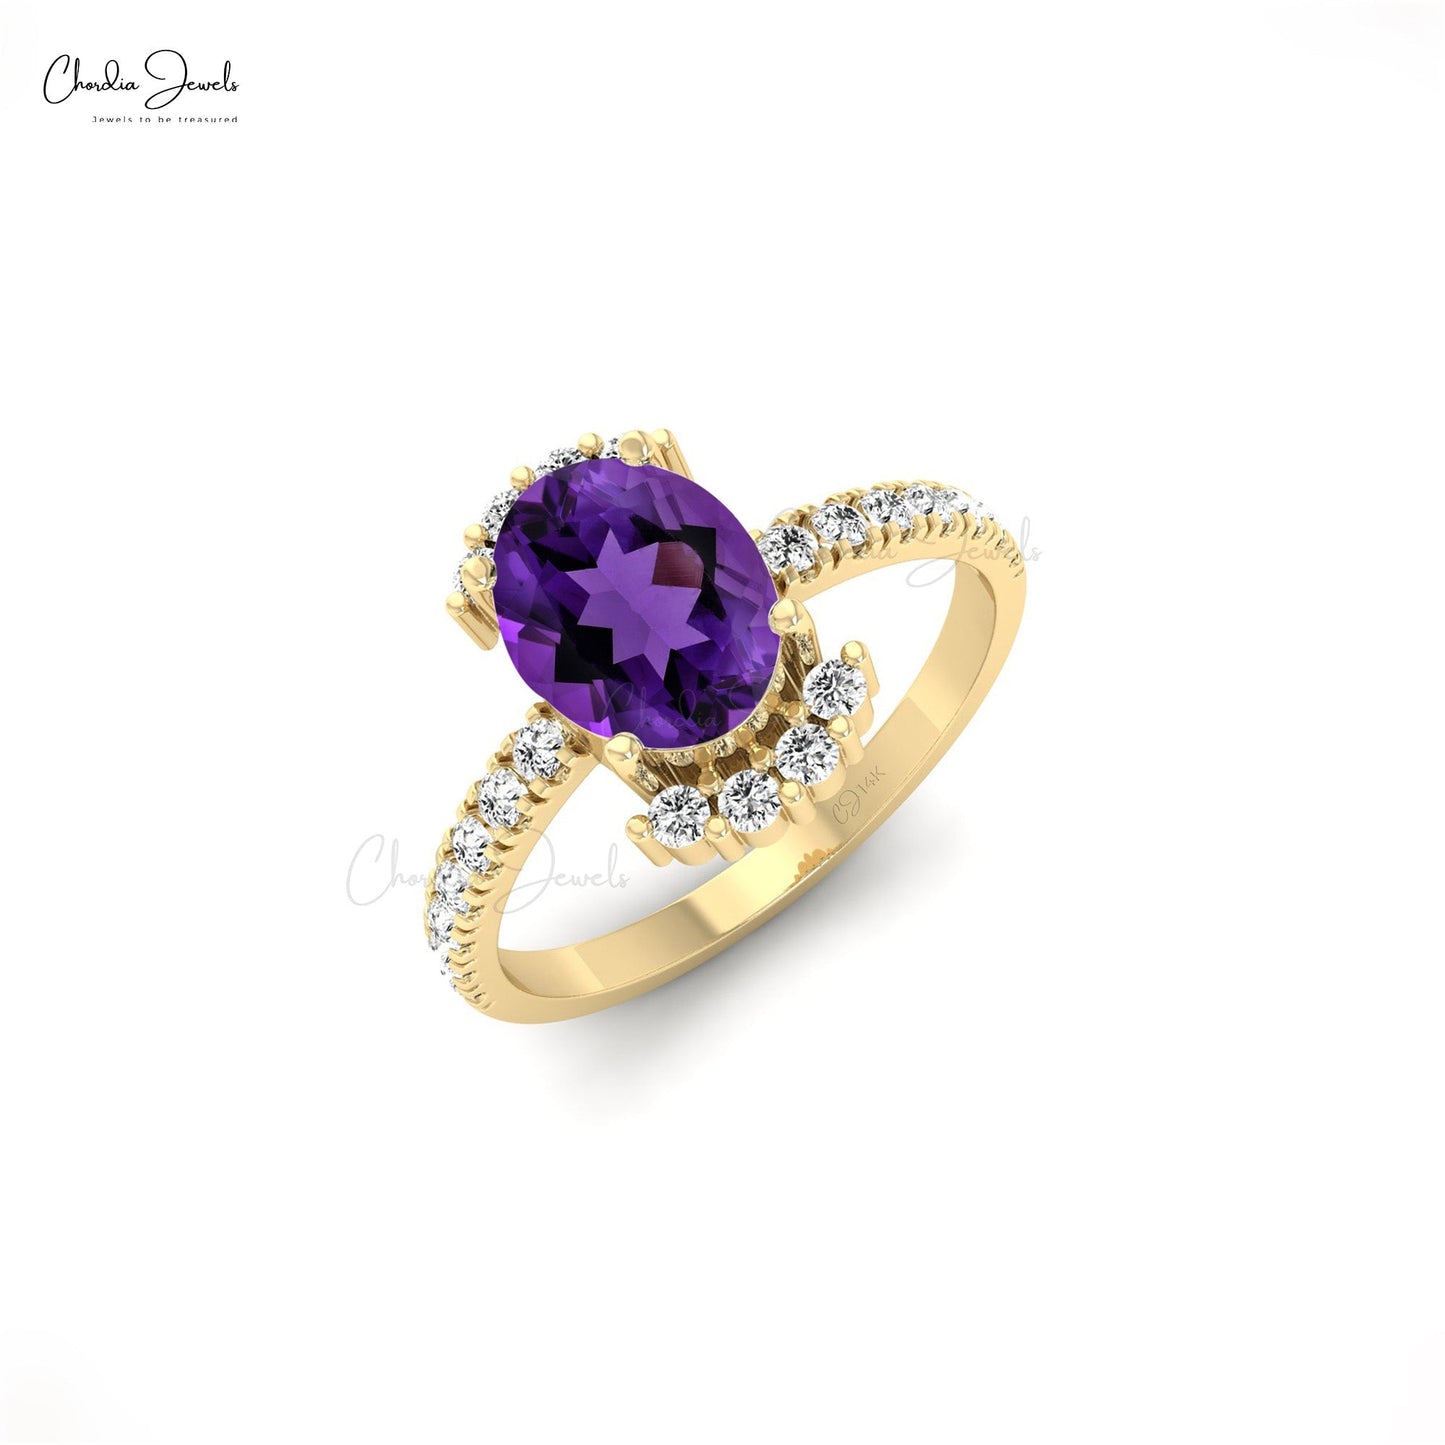 Load image into Gallery viewer, Natural 1.34ct Amethyst Gemstone Dainty Ring 14k Solid Gold Diamond Half-Halo Engagement Ring
